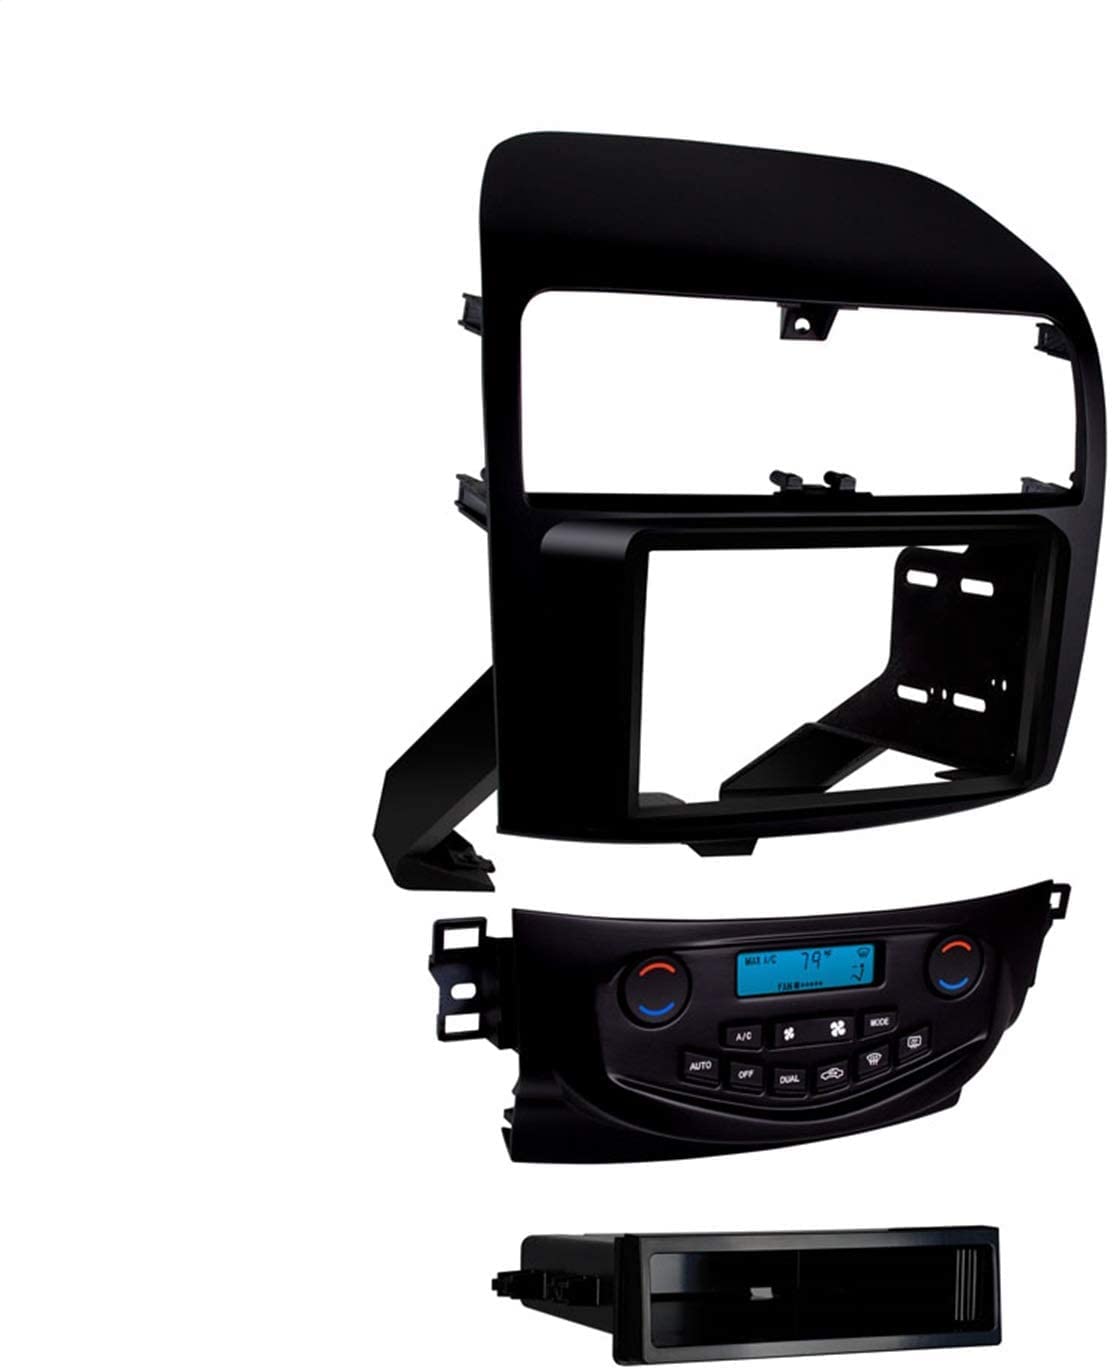 Metra Compatible with Radio, 99-7809B Double/Single DIN Dash Kit for 2004 - 2008 Acura TSX without Navigation (Matte Black)